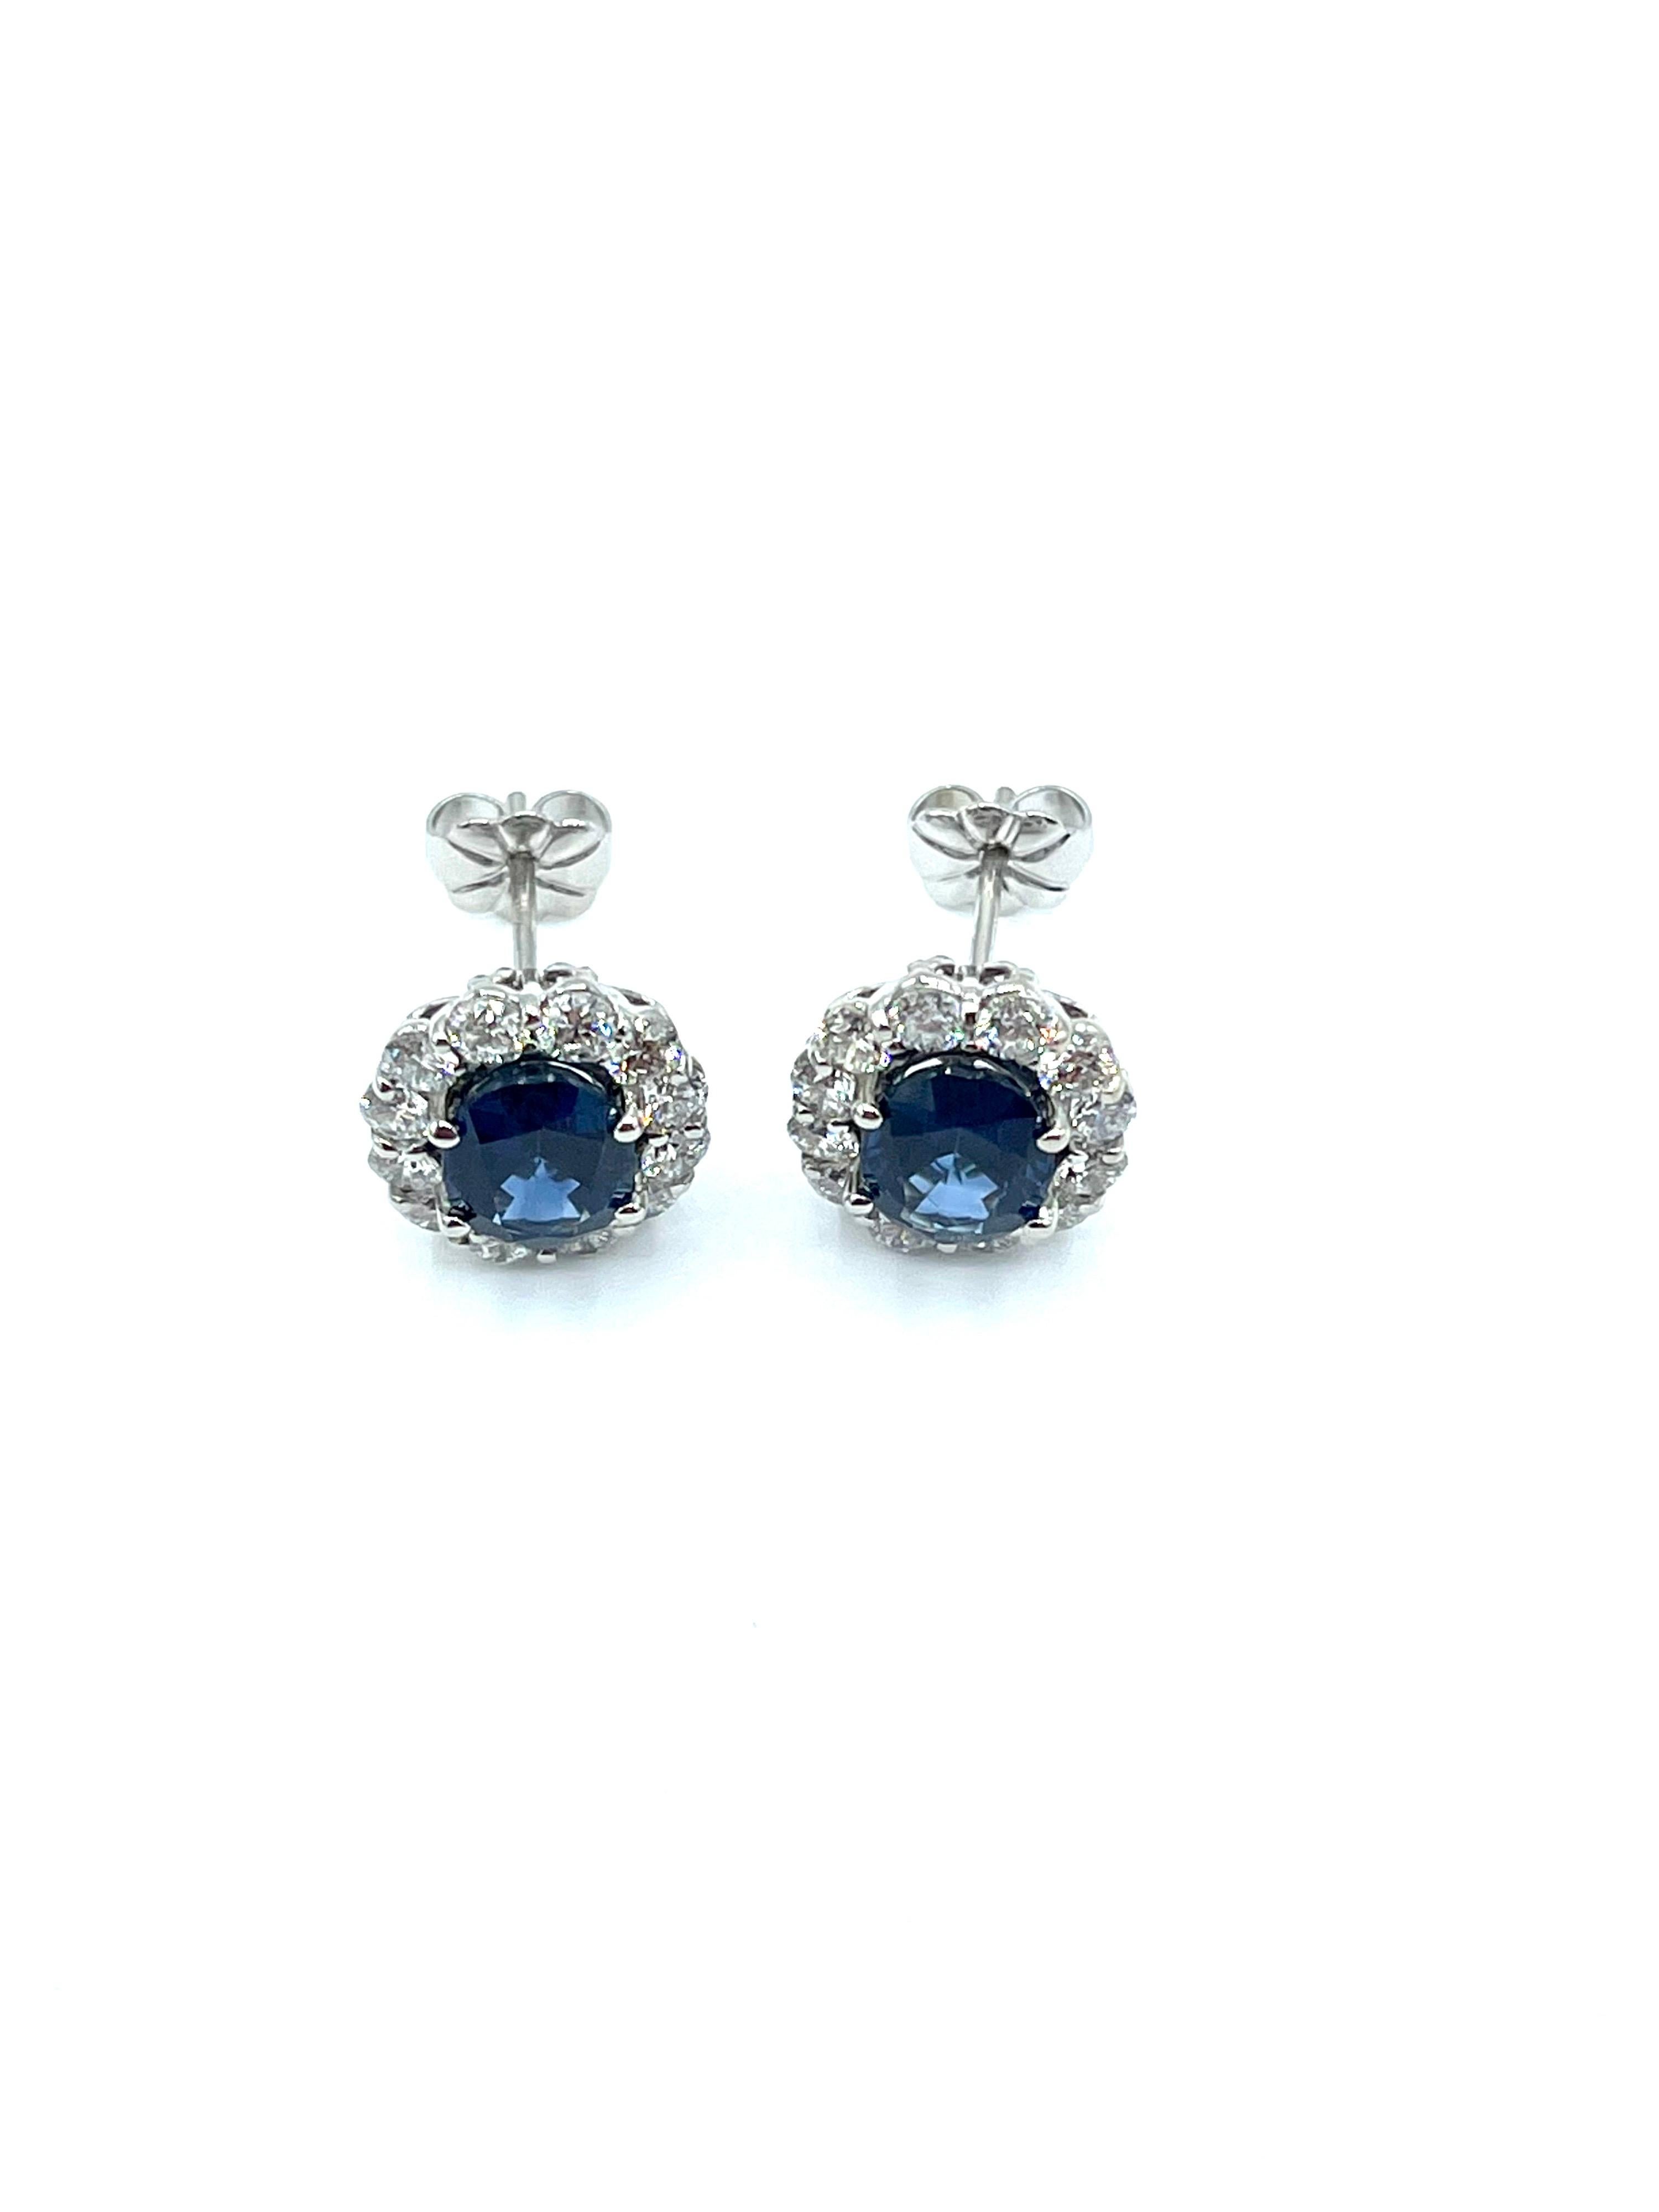 A gorgeous pair of Blue Sapphire and Diamond earrings!  The two oval Sapphires are set in four prongs, surrounded by a single row of round brilliant cut Diamonds, on a center mounted post.  The two Sapphires have a combined weight of 3.16 carats,